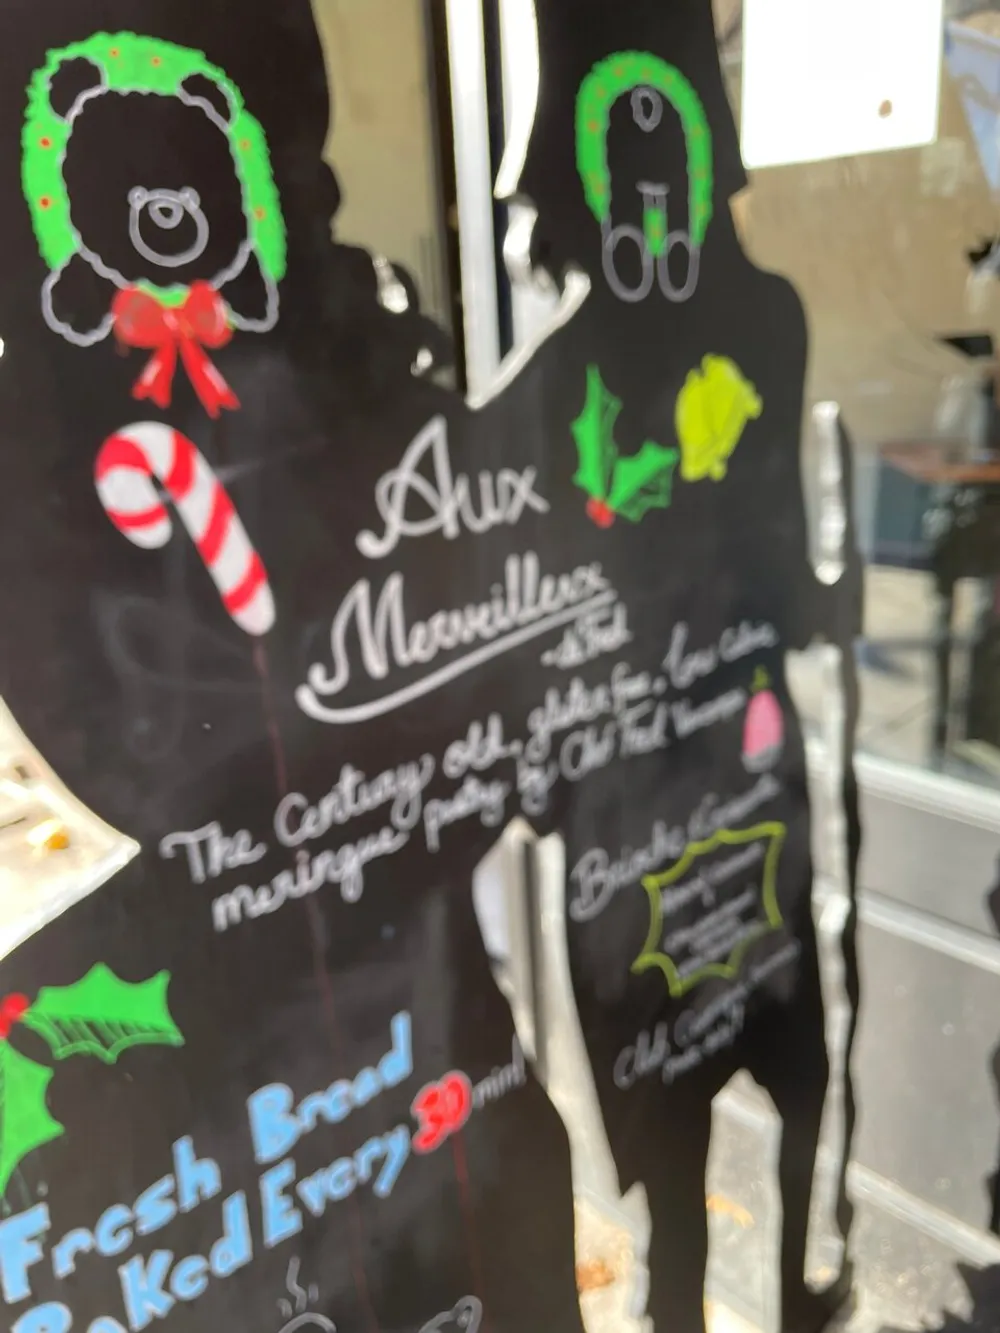 The image features a festive-looking blurred blackboard sign with colorful chalk illustrations and text that seems to be advertising fresh bread and other specialties with a candy cane and Christmas decorations suggesting a holiday theme